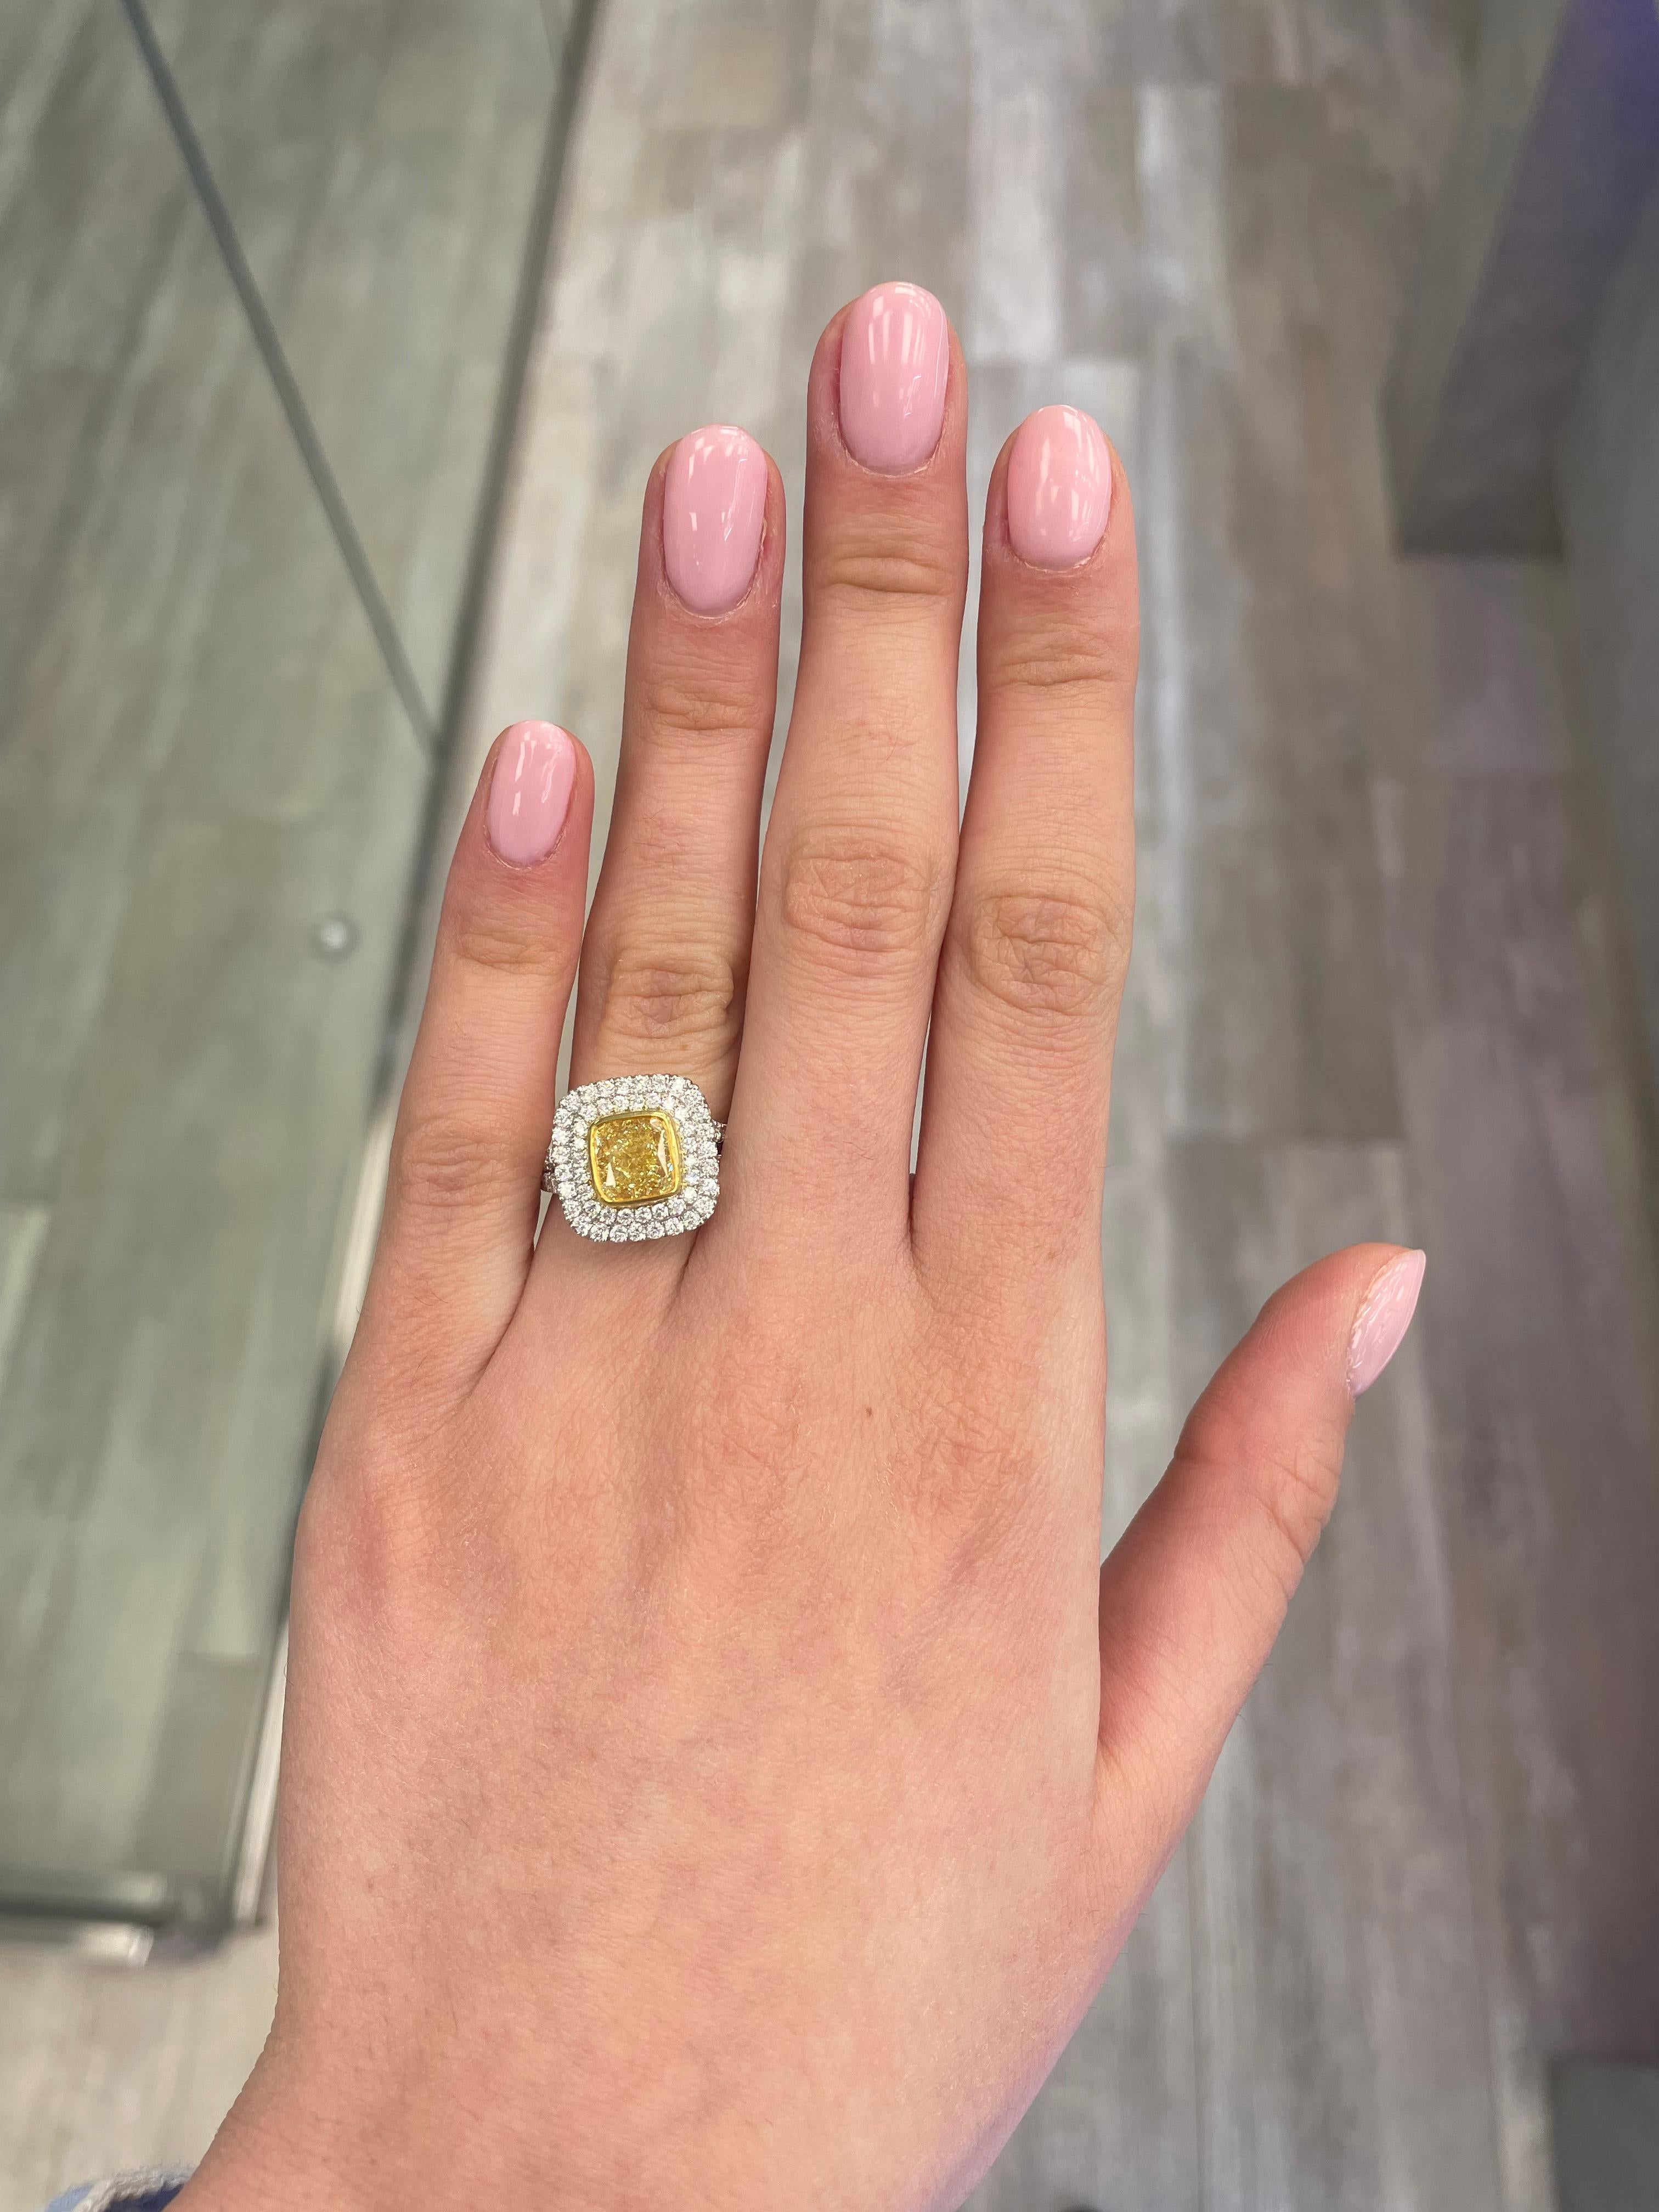 Stunning modern GIA certified yellow diamond double halo ring, two-tone 18k yellow and white gold. By Alexander Beverly Hills
3.44 carats total diamond weight.
2.32 carat cushion cut Fancy Yellow color and VS2 clarity diamond, GIA graded.